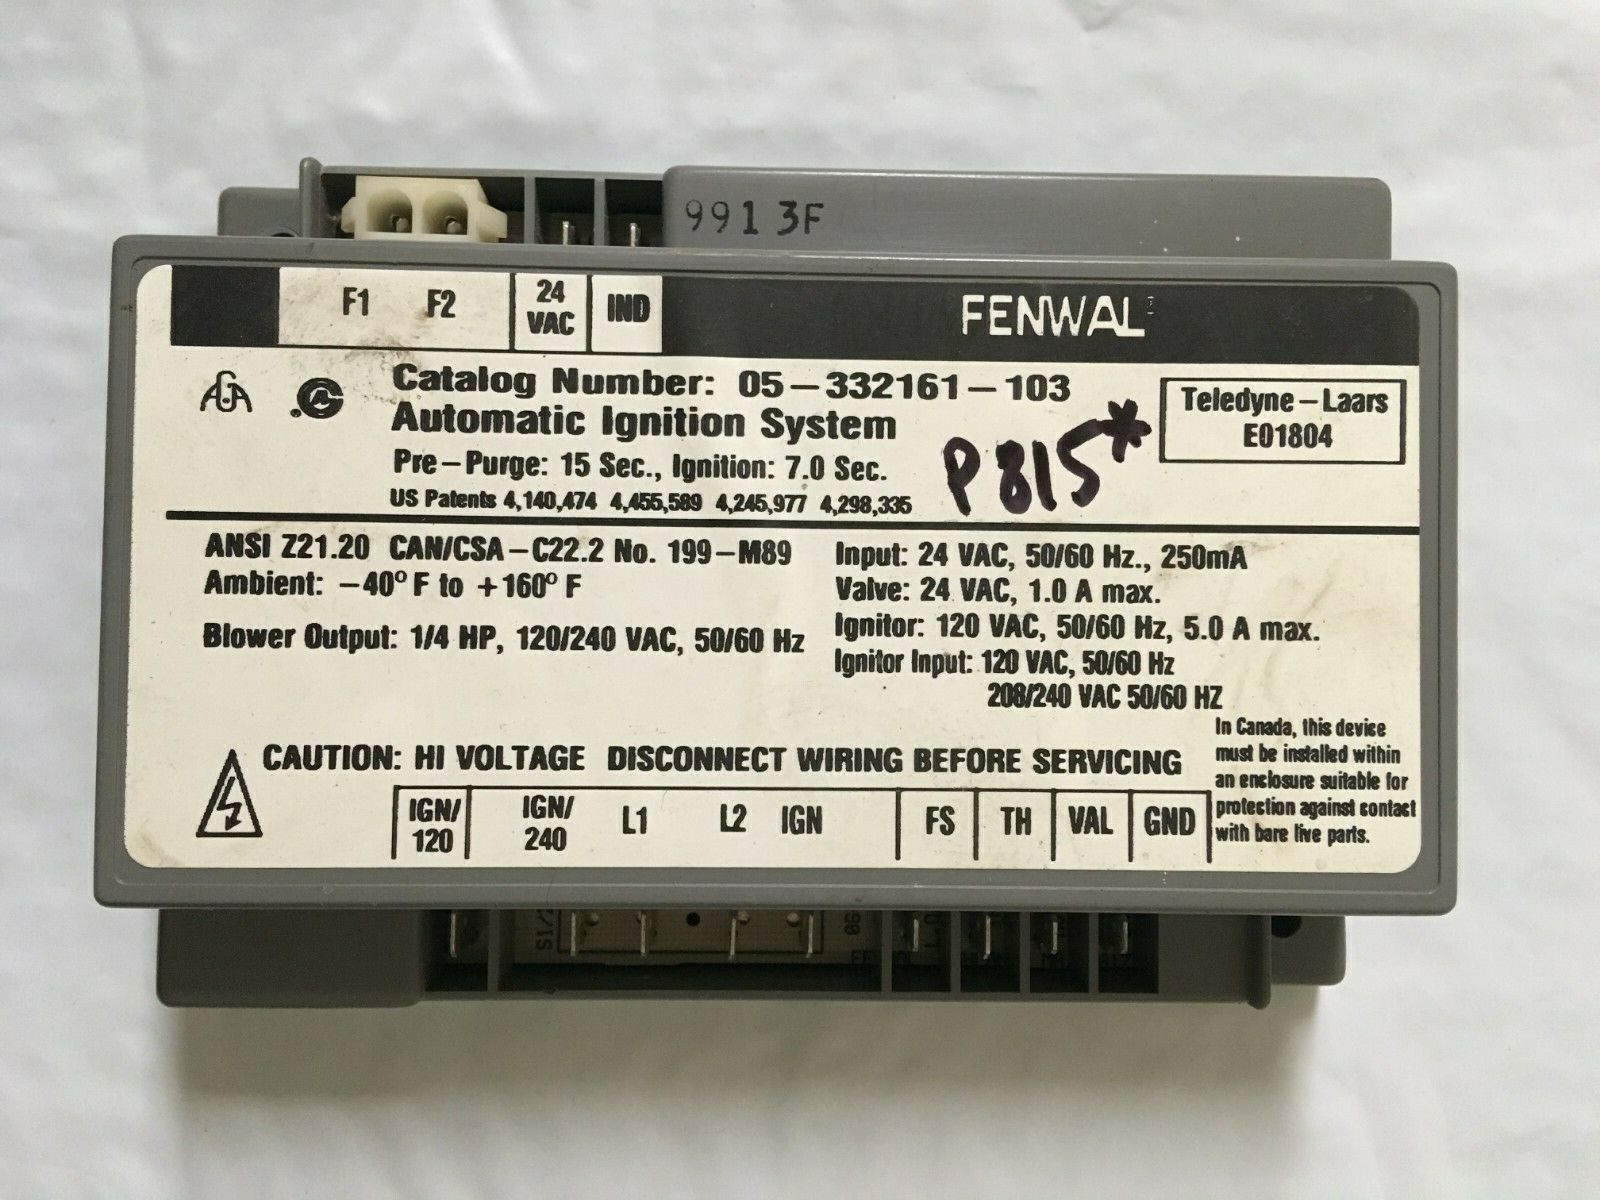 FENWAL 05-332161-103 Automatic Ignition Systems Control Module used #P815*